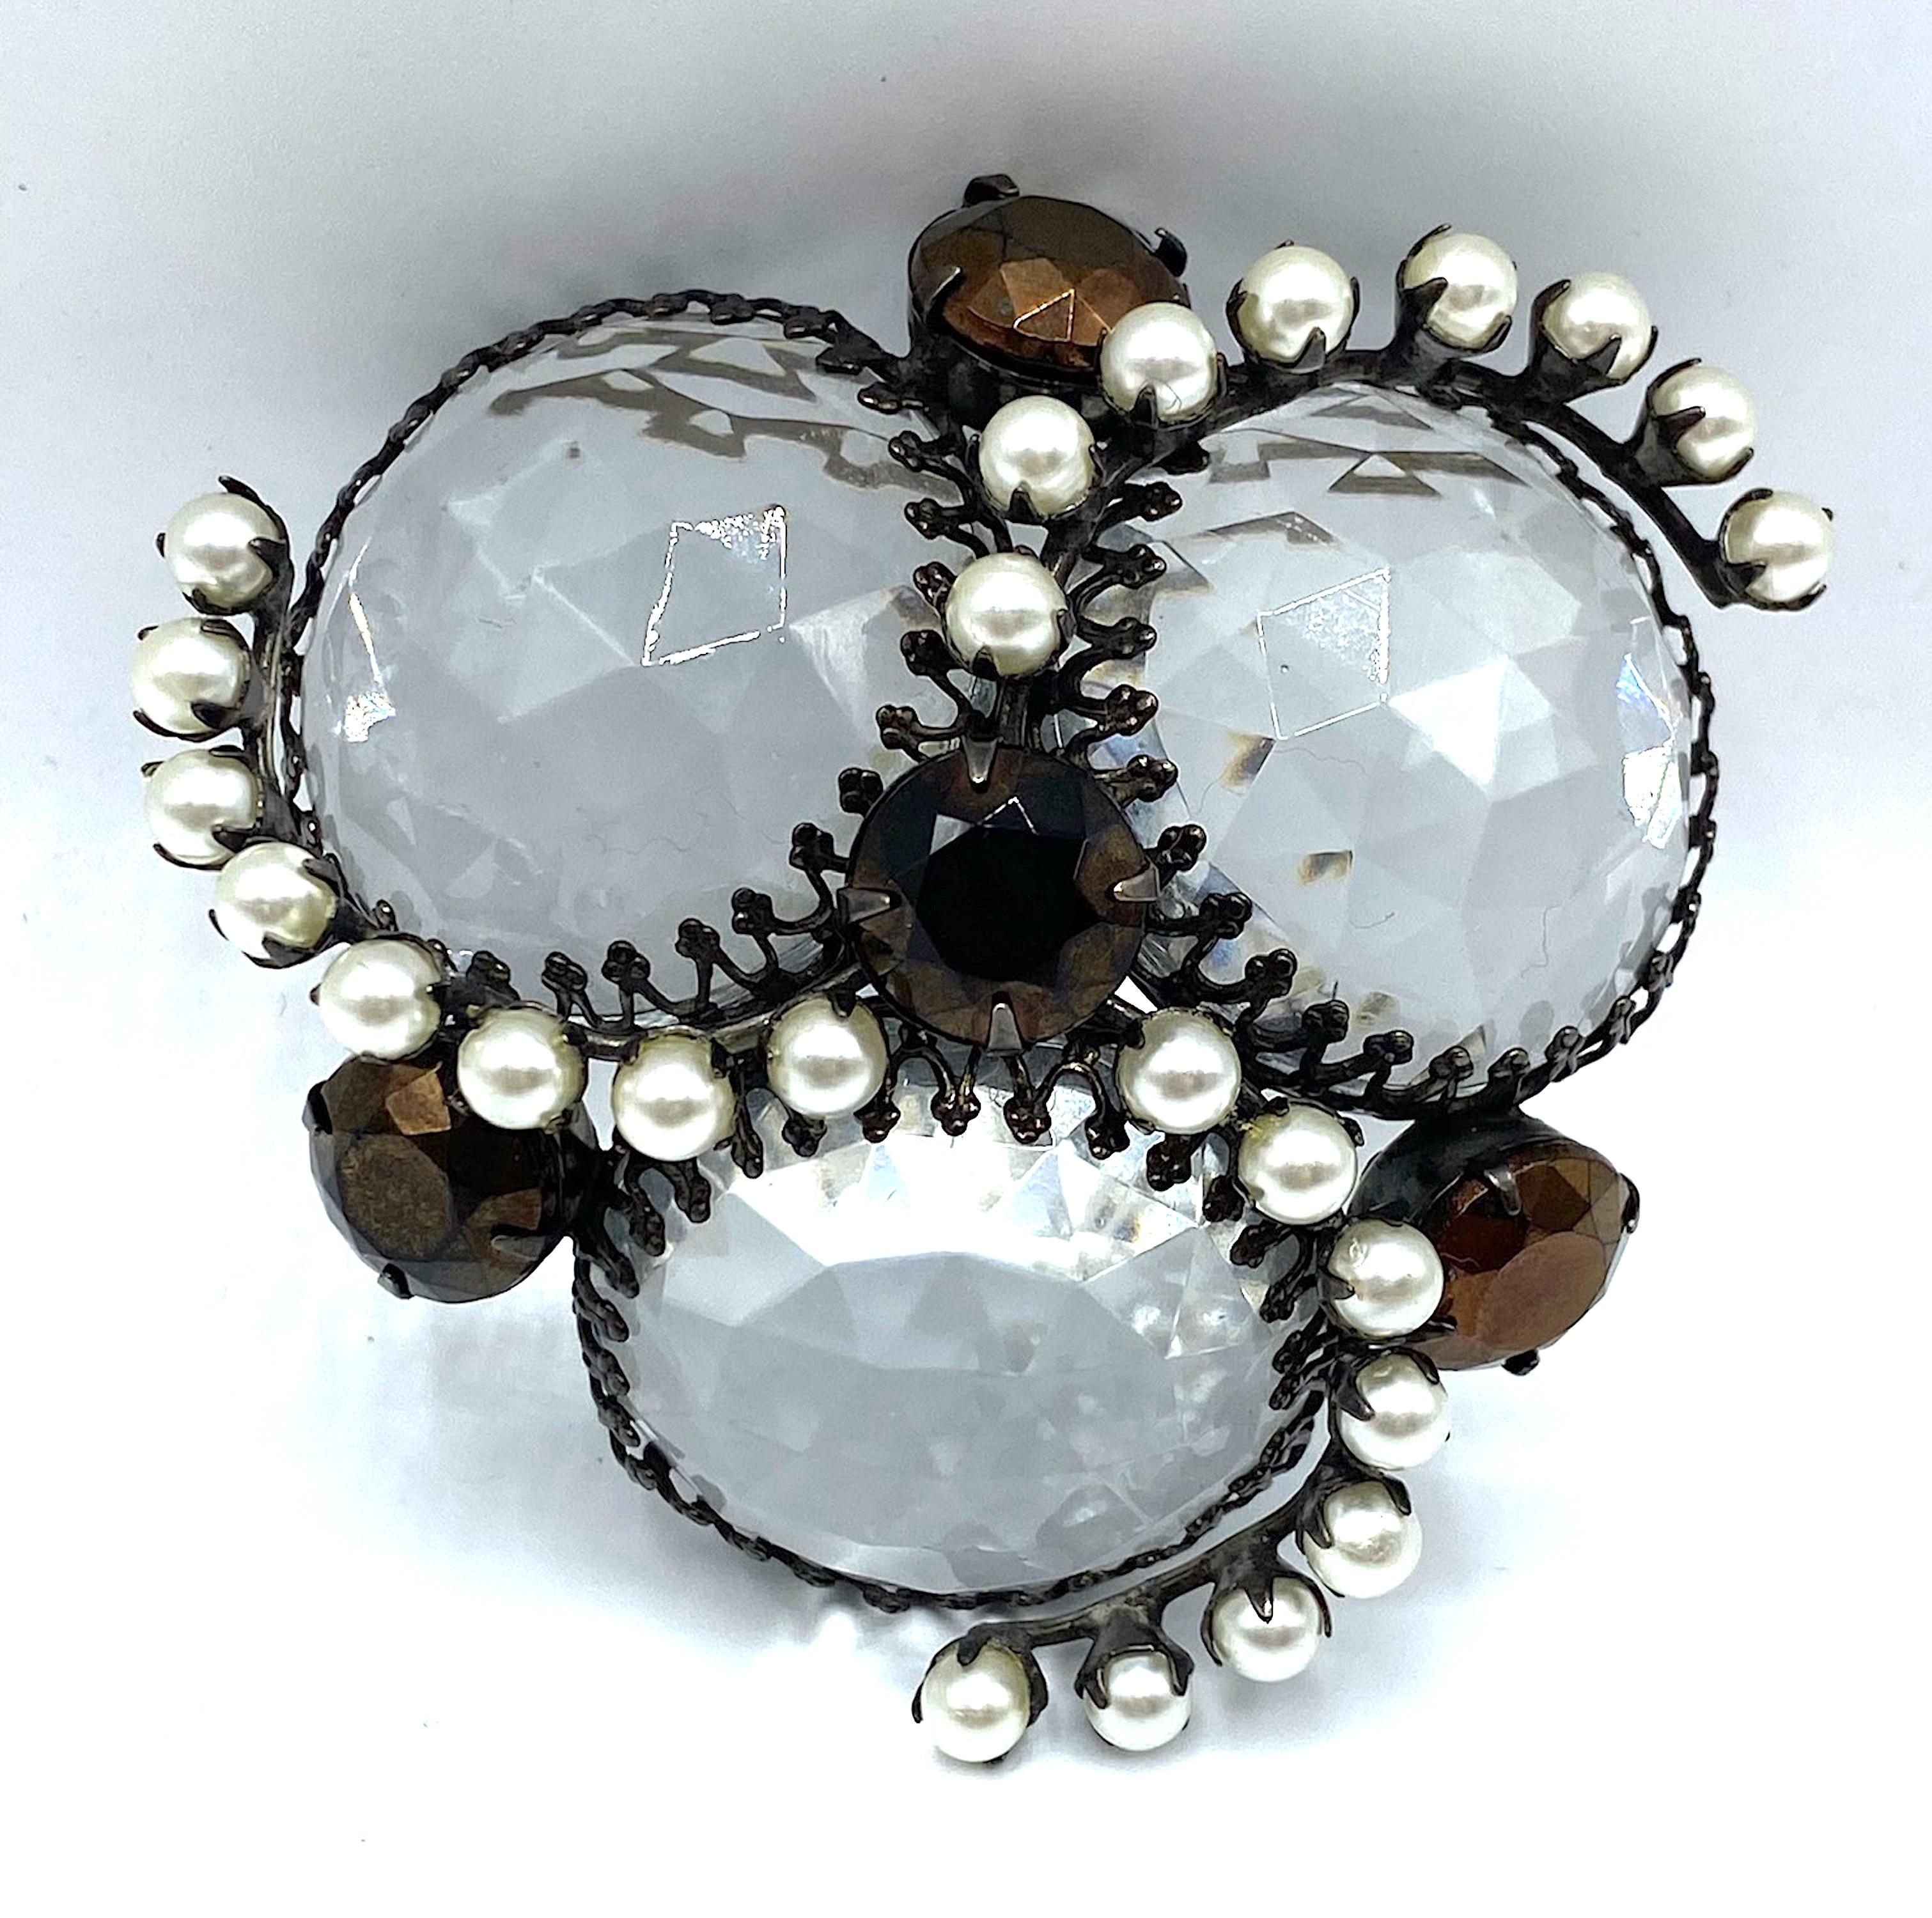 A rare and unusual design signed Schreiner, New York brooch from the 1950s. Charcoal grey gun metal patina on the metal. The design features three large faceted and clear crystal 1.13 inch diameter cabochons set into a domed mounting. The cabochons